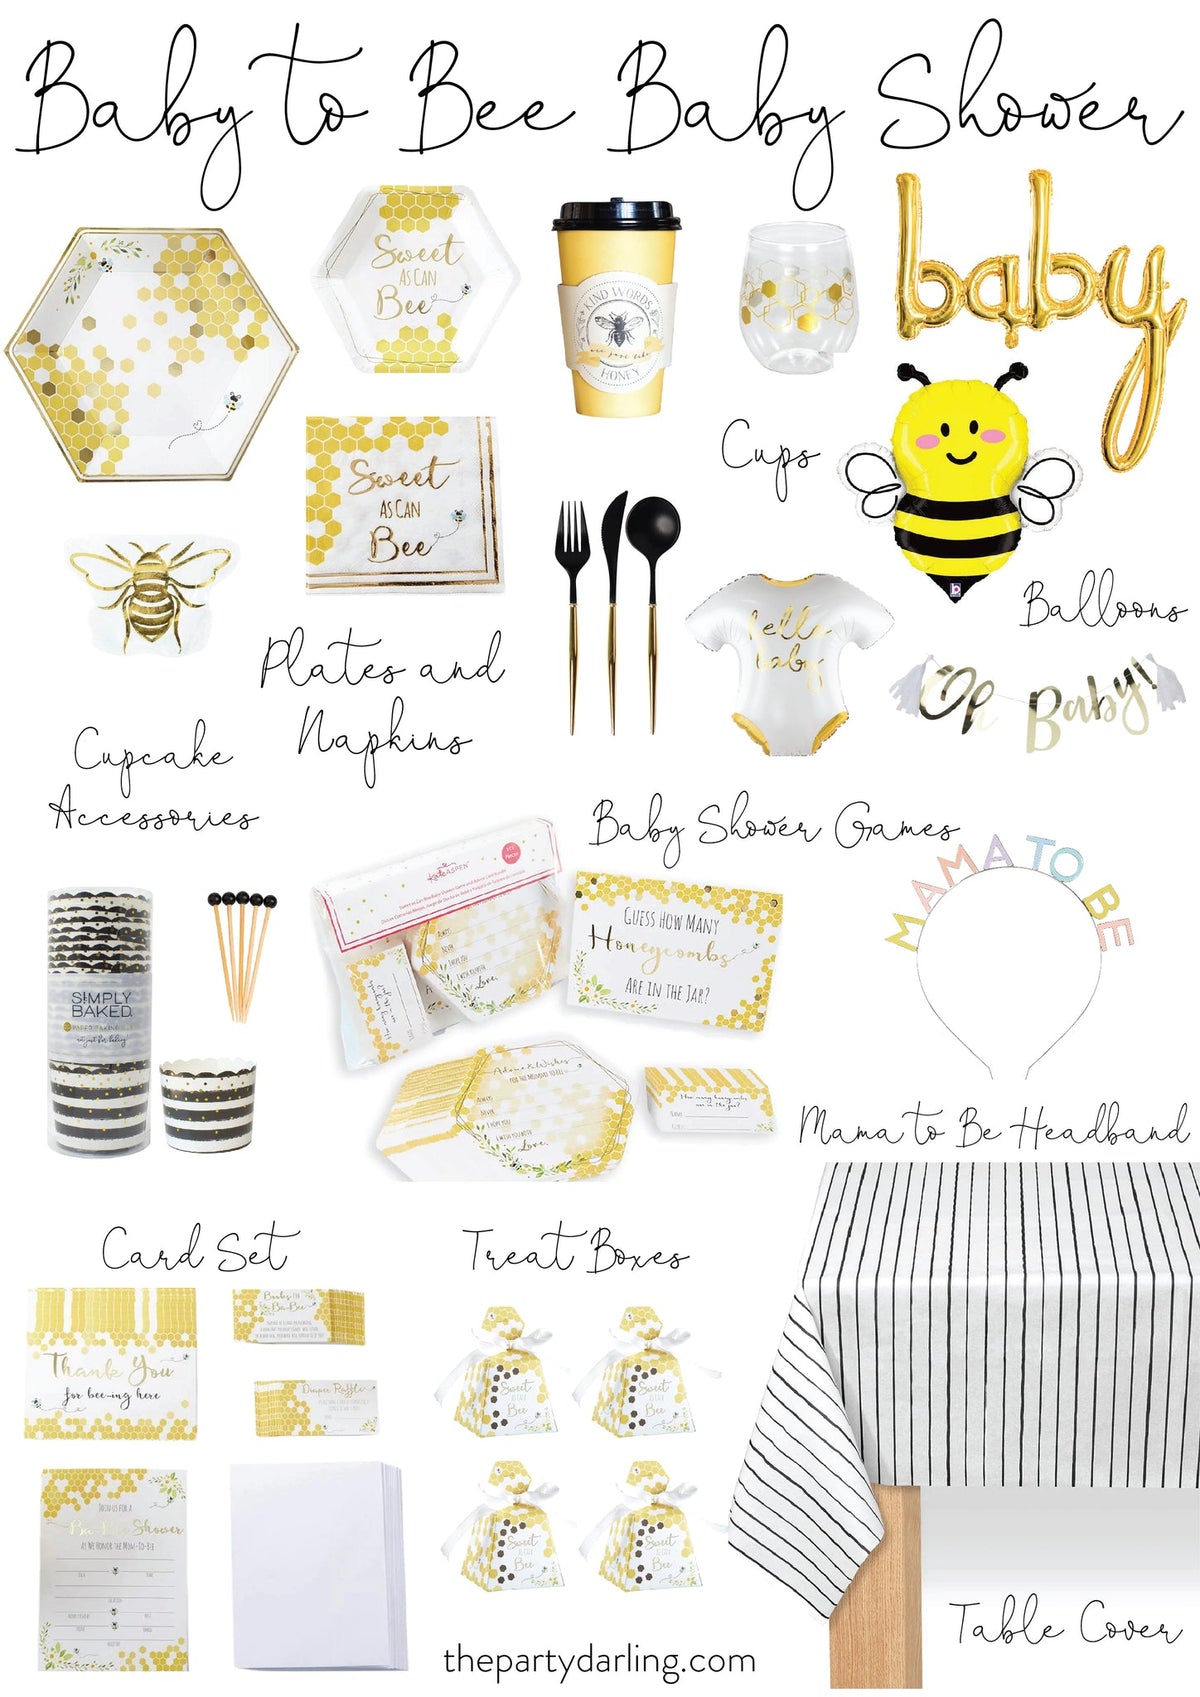 Complete Bumble Bee Party Collection (includes personalized invites &  customized party accessories) — Jen T. by Design